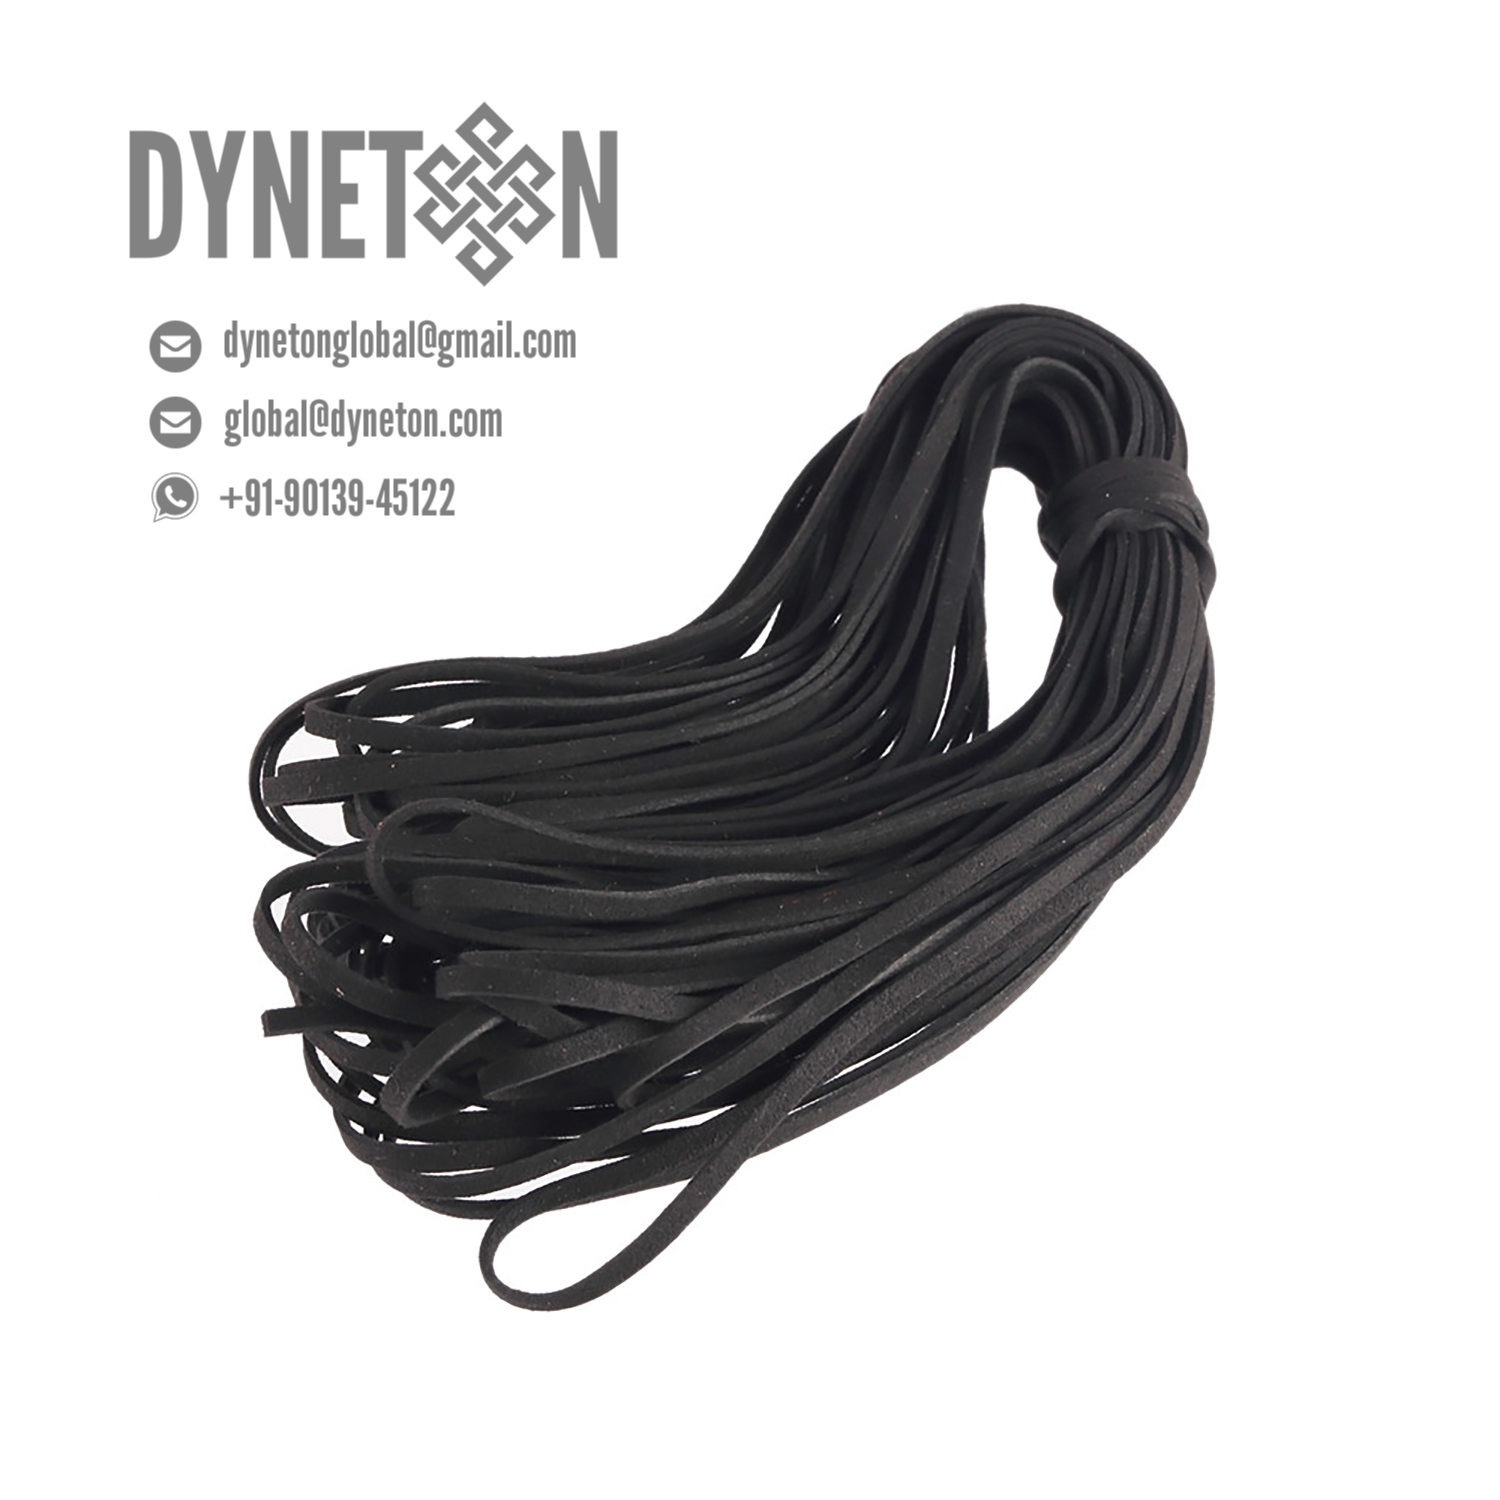 3mm Flat Leather Cord - DYNETON / Flat Leather Cords 3 mm